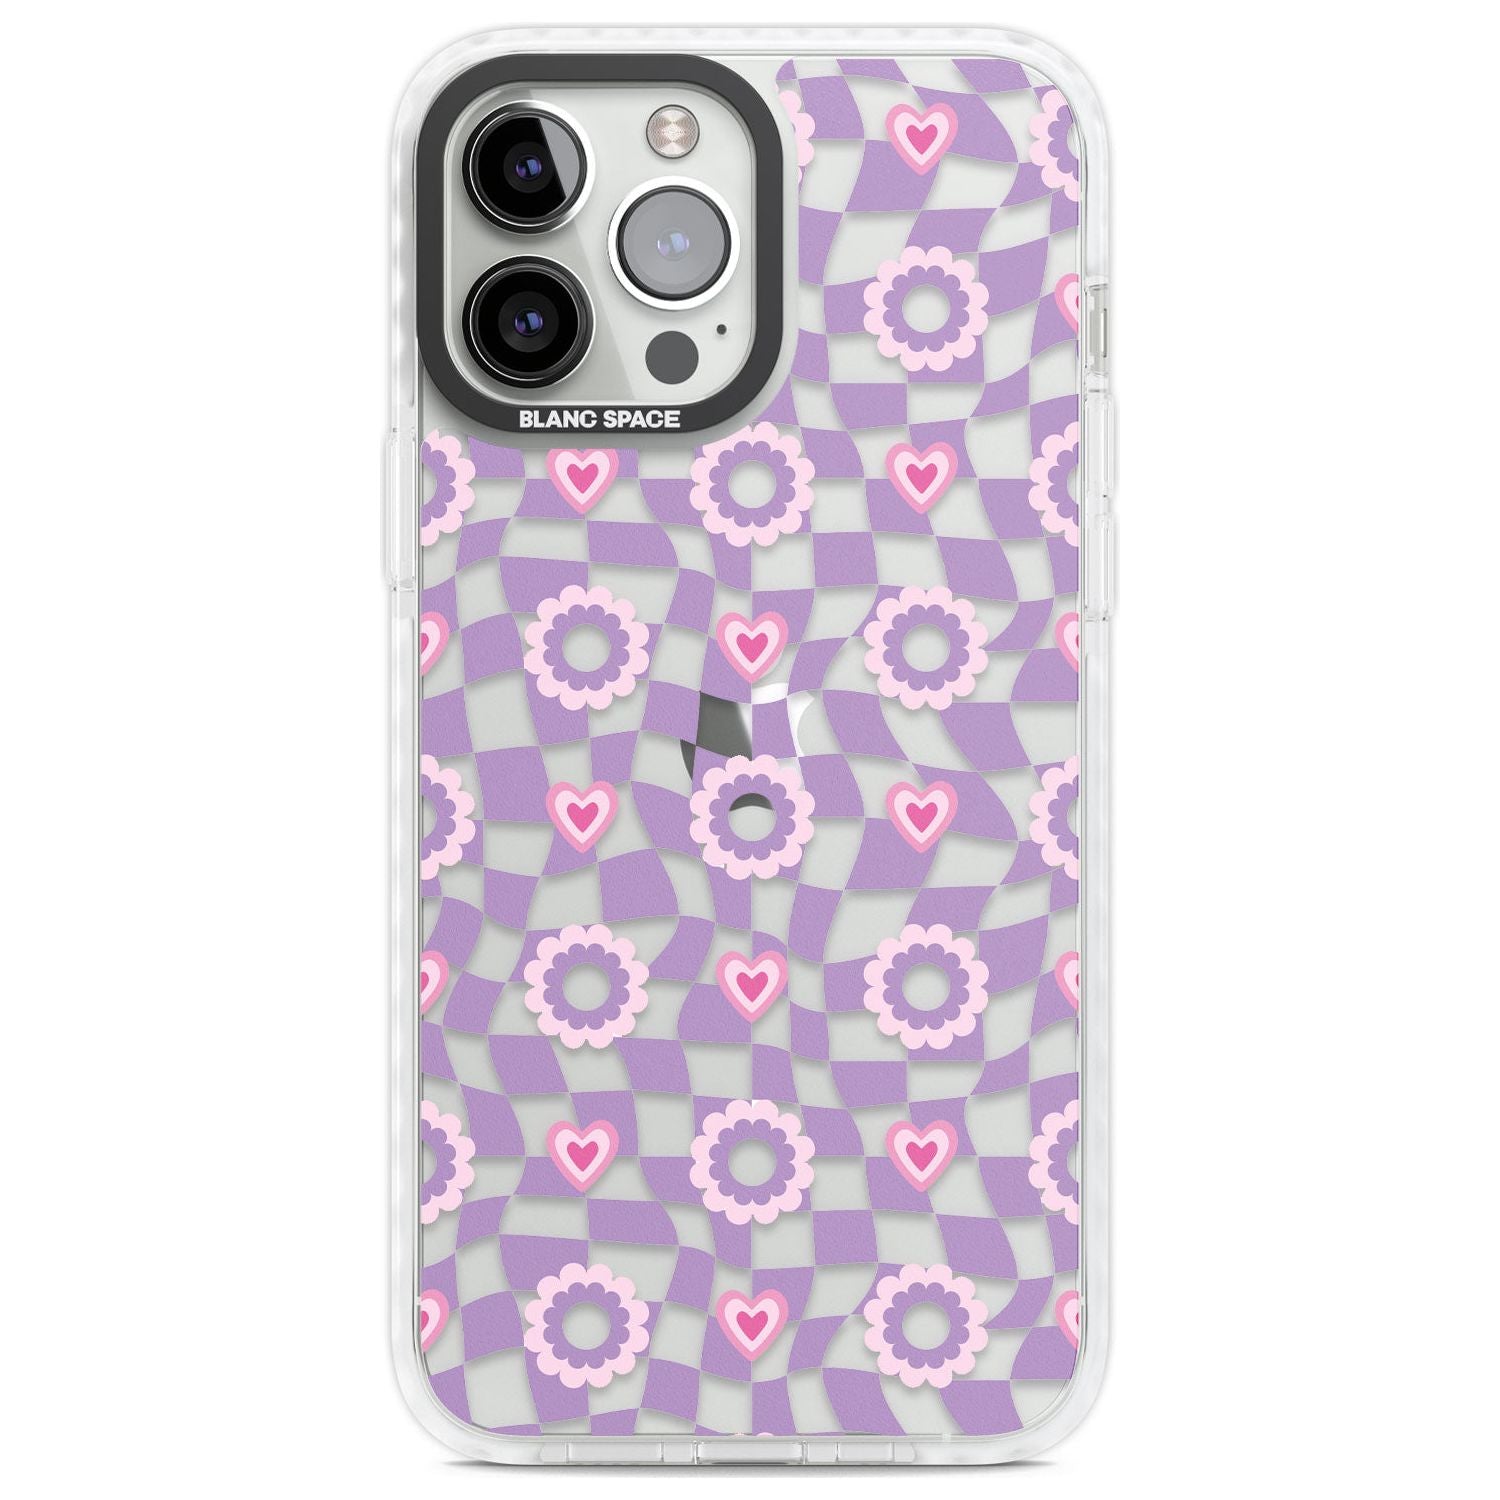 Checkered Love Pattern Phone Case iPhone 13 Pro Max / Impact Case,iPhone 14 Pro Max / Impact Case Blanc Space